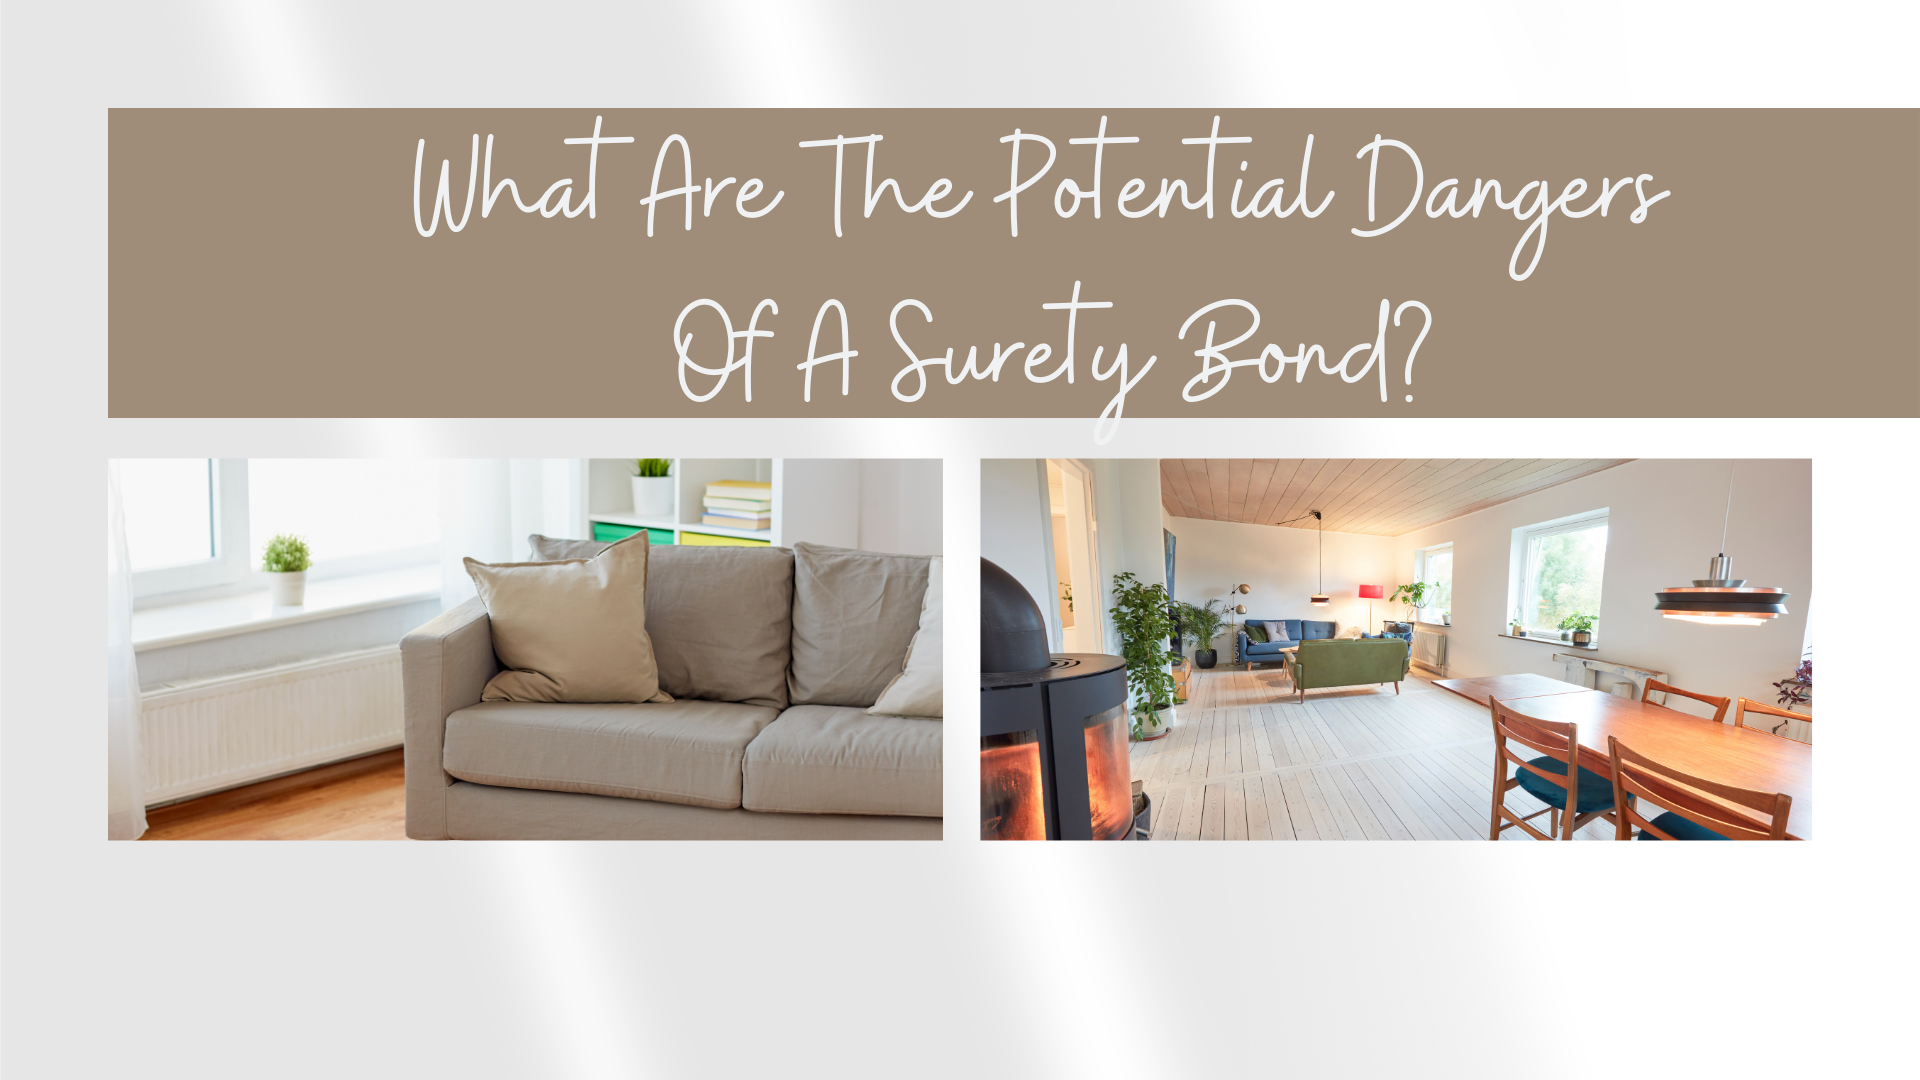 surety bond - What are the consequences of failing to obtain a surety bond - home interior